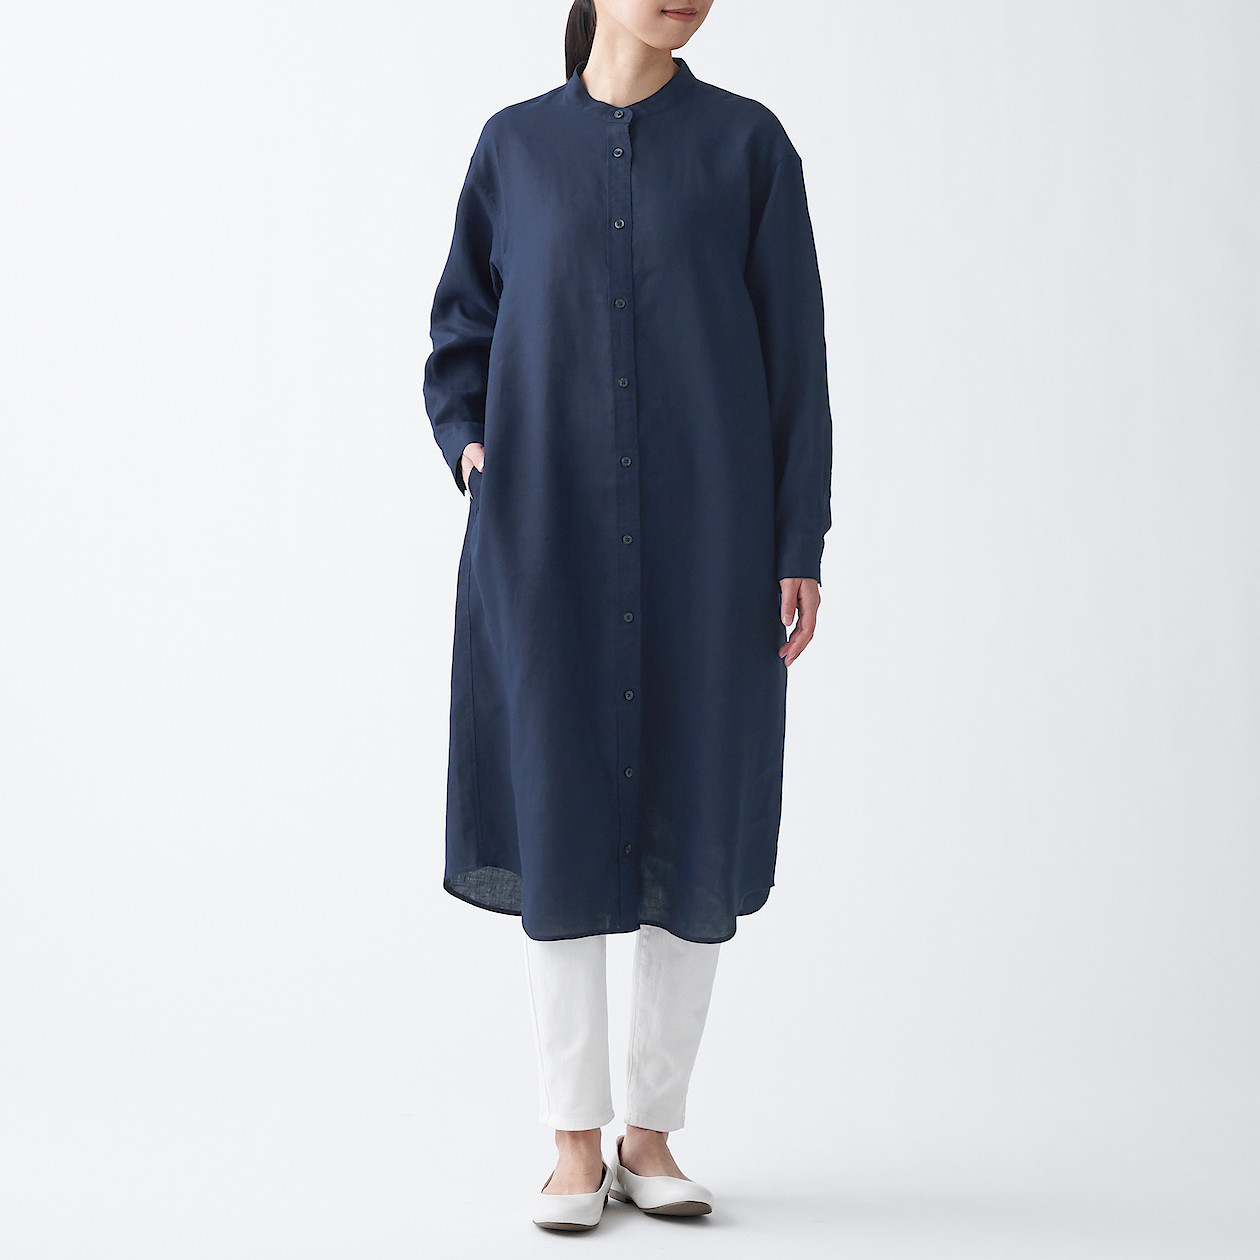 Buy French Linen Stand Collar Dress online | Muji